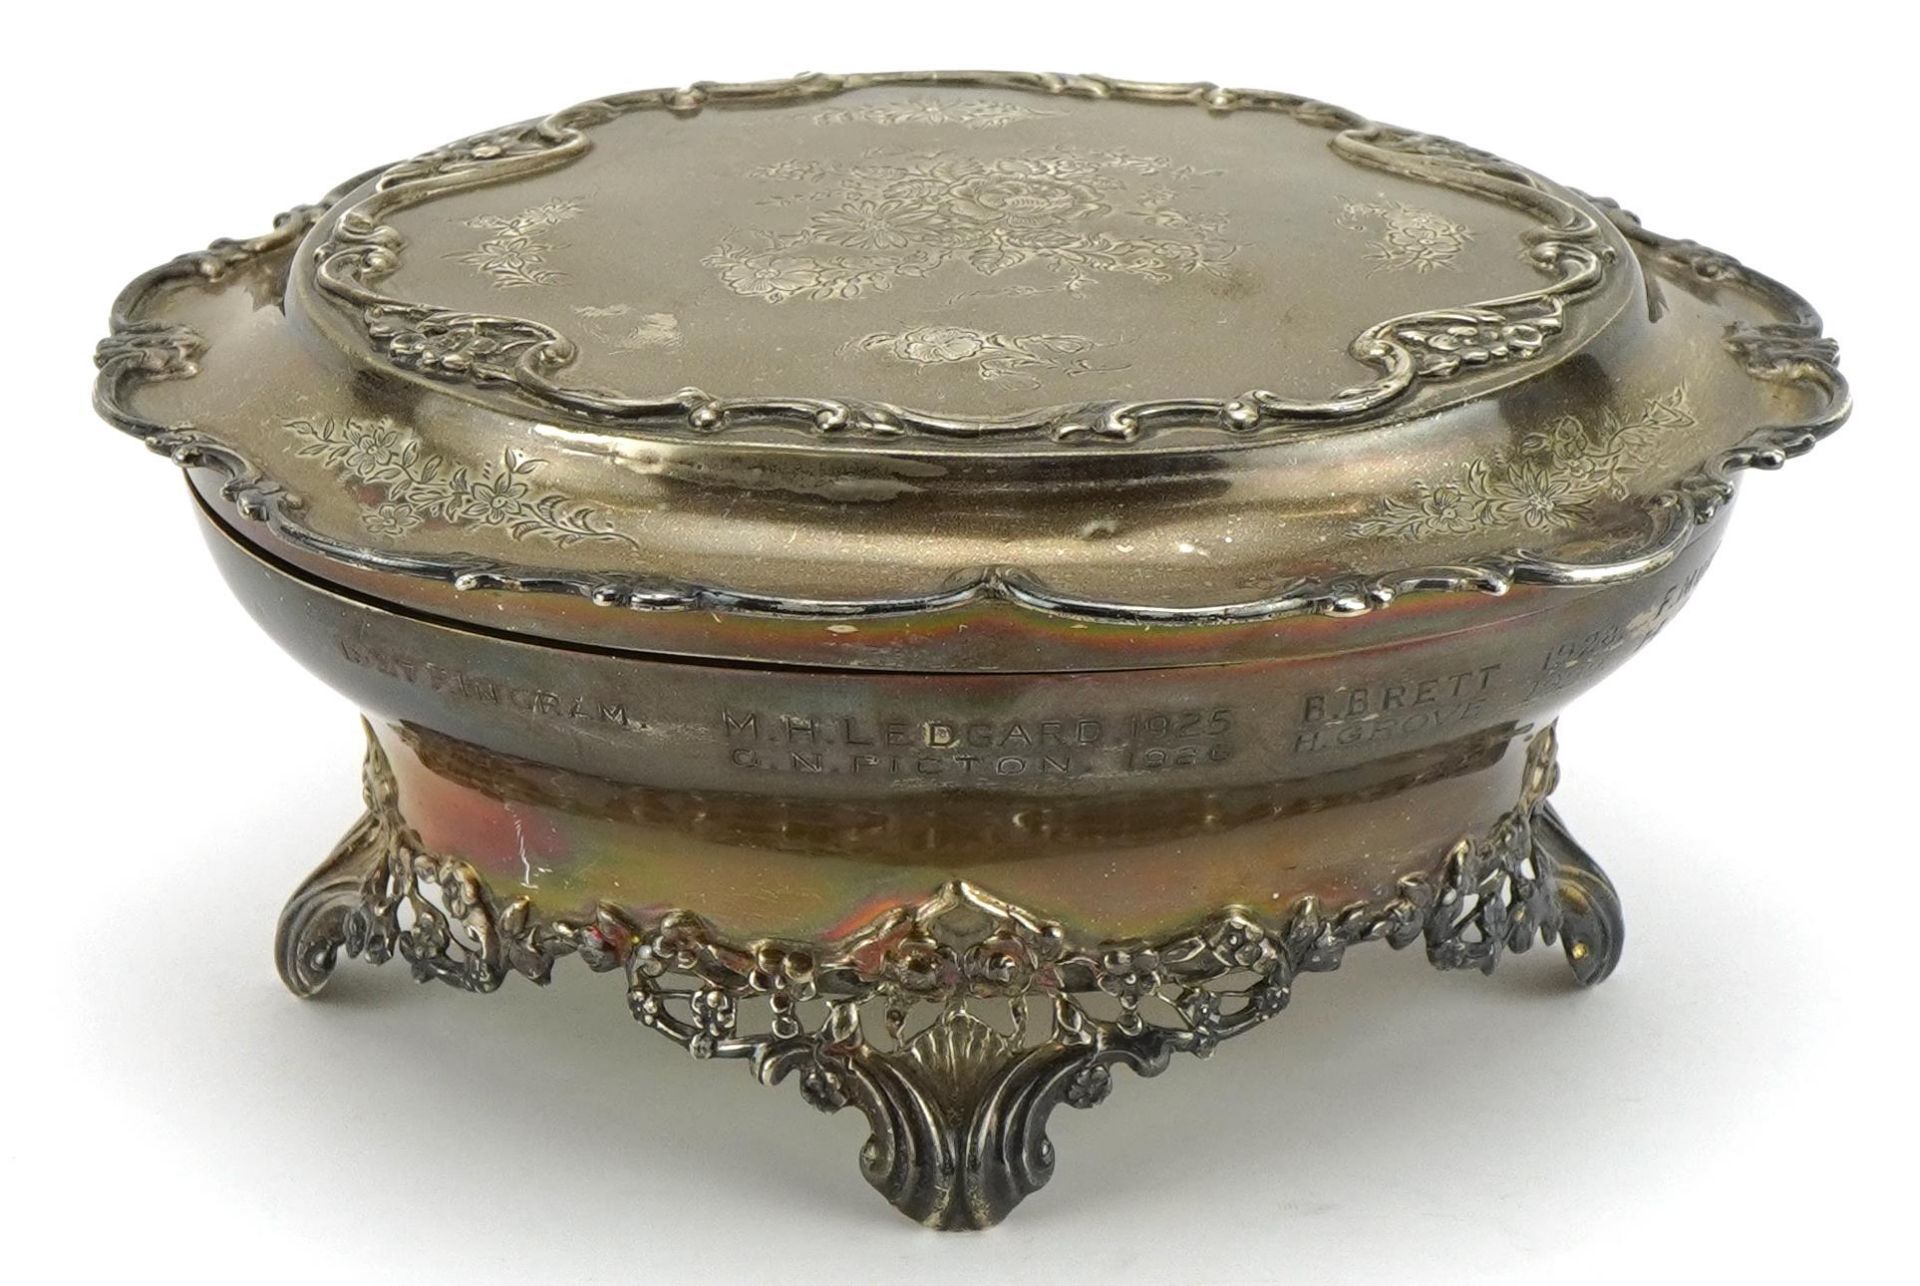 Willian Comyns, Edwardian silver casket with hinged lid and gilt interior, London 1903, 8cm H x 16.